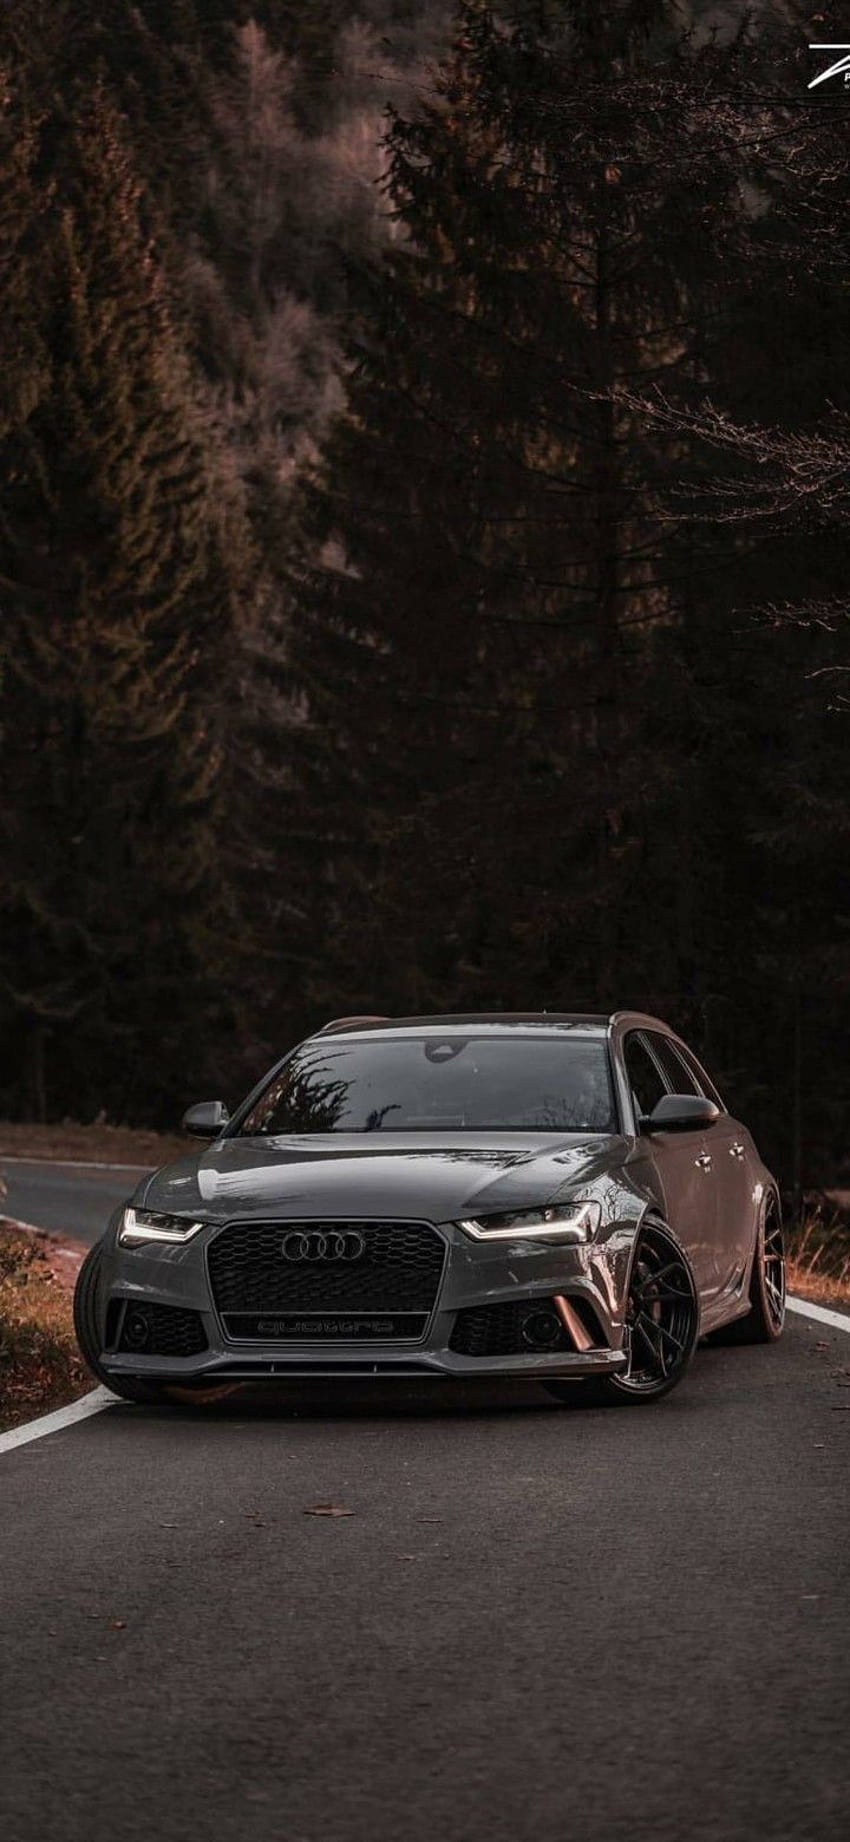 Pin on Voitures de luxe, rs6 iphone HD phone wallpaper